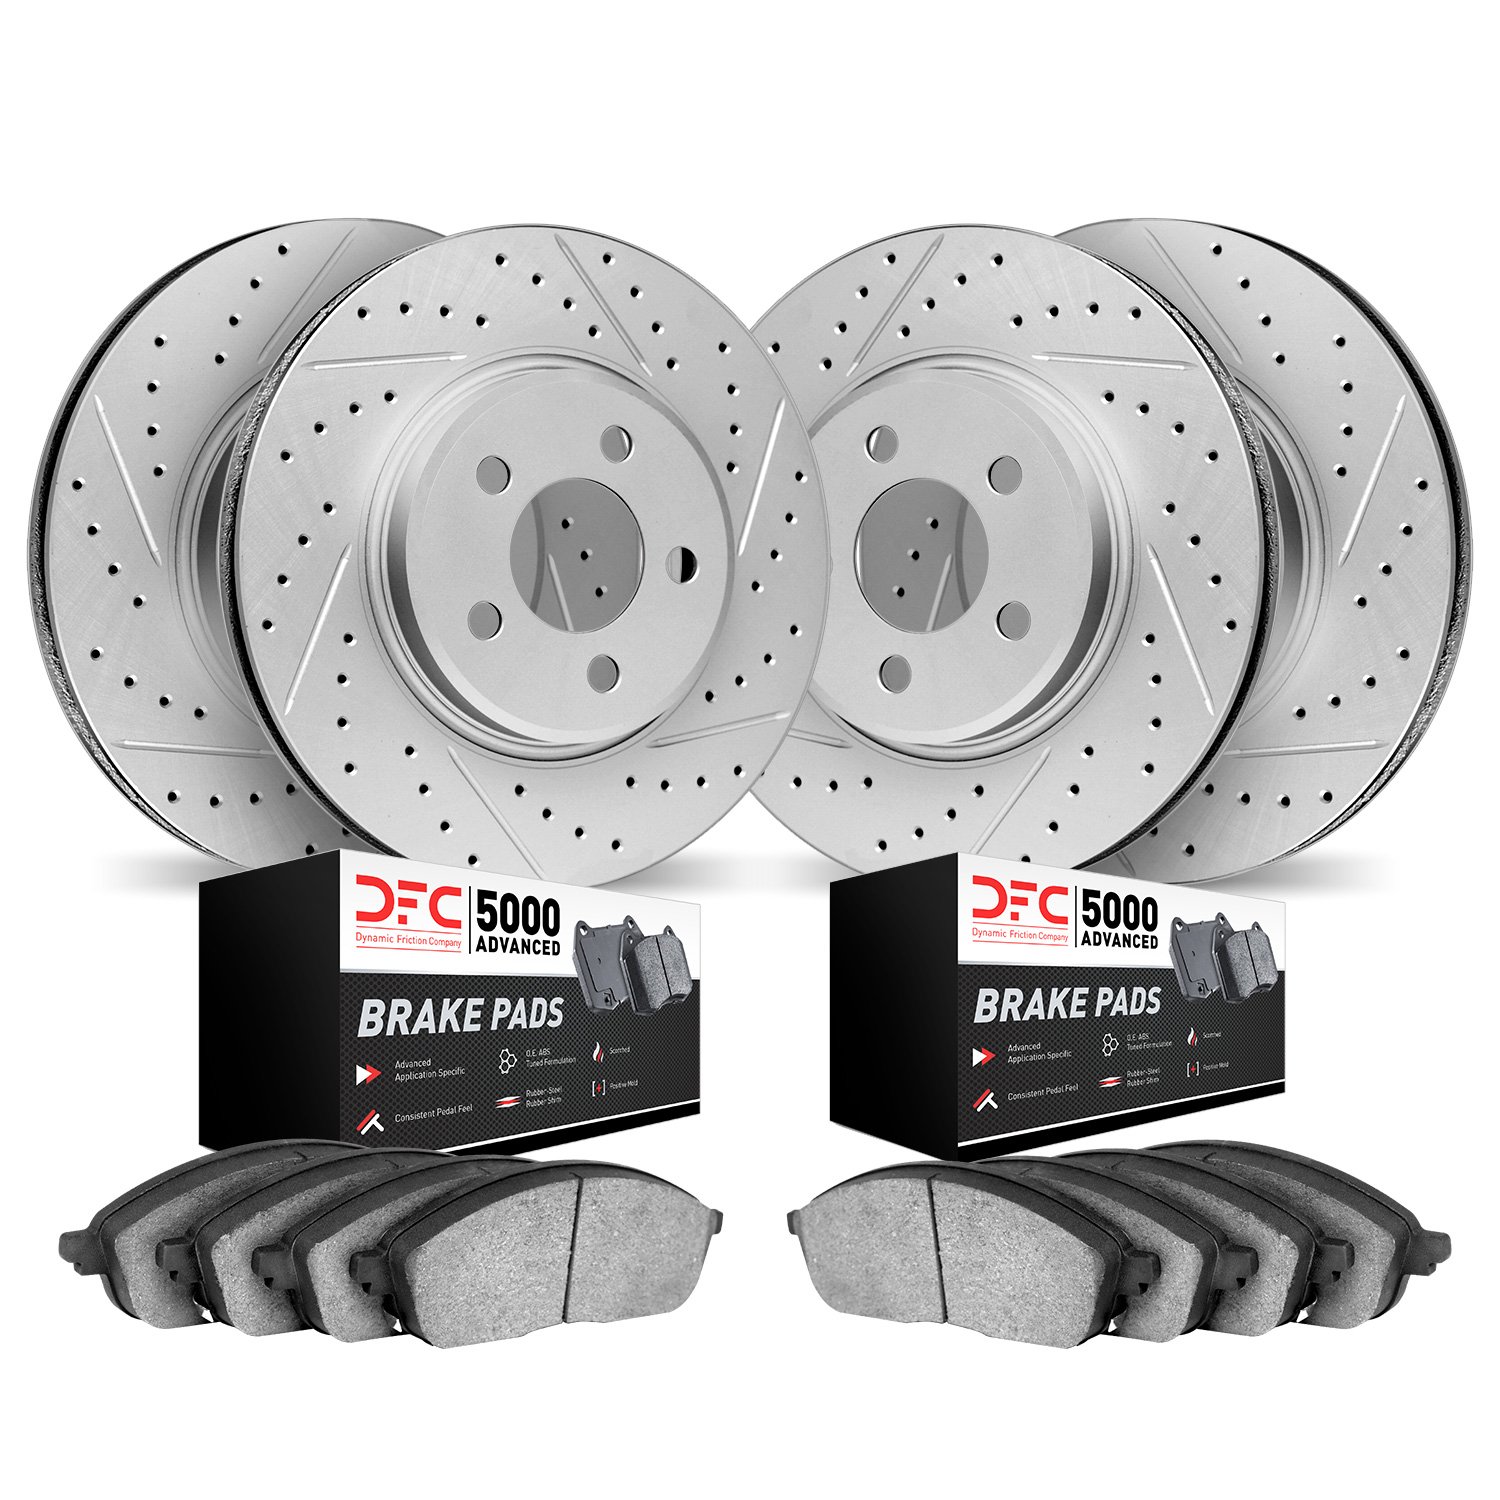 2504-74035 Geoperformance Drilled/Slotted Rotors w/5000 Advanced Brake Pads Kit, 2006-2010 Audi/Volkswagen, Position: Front and